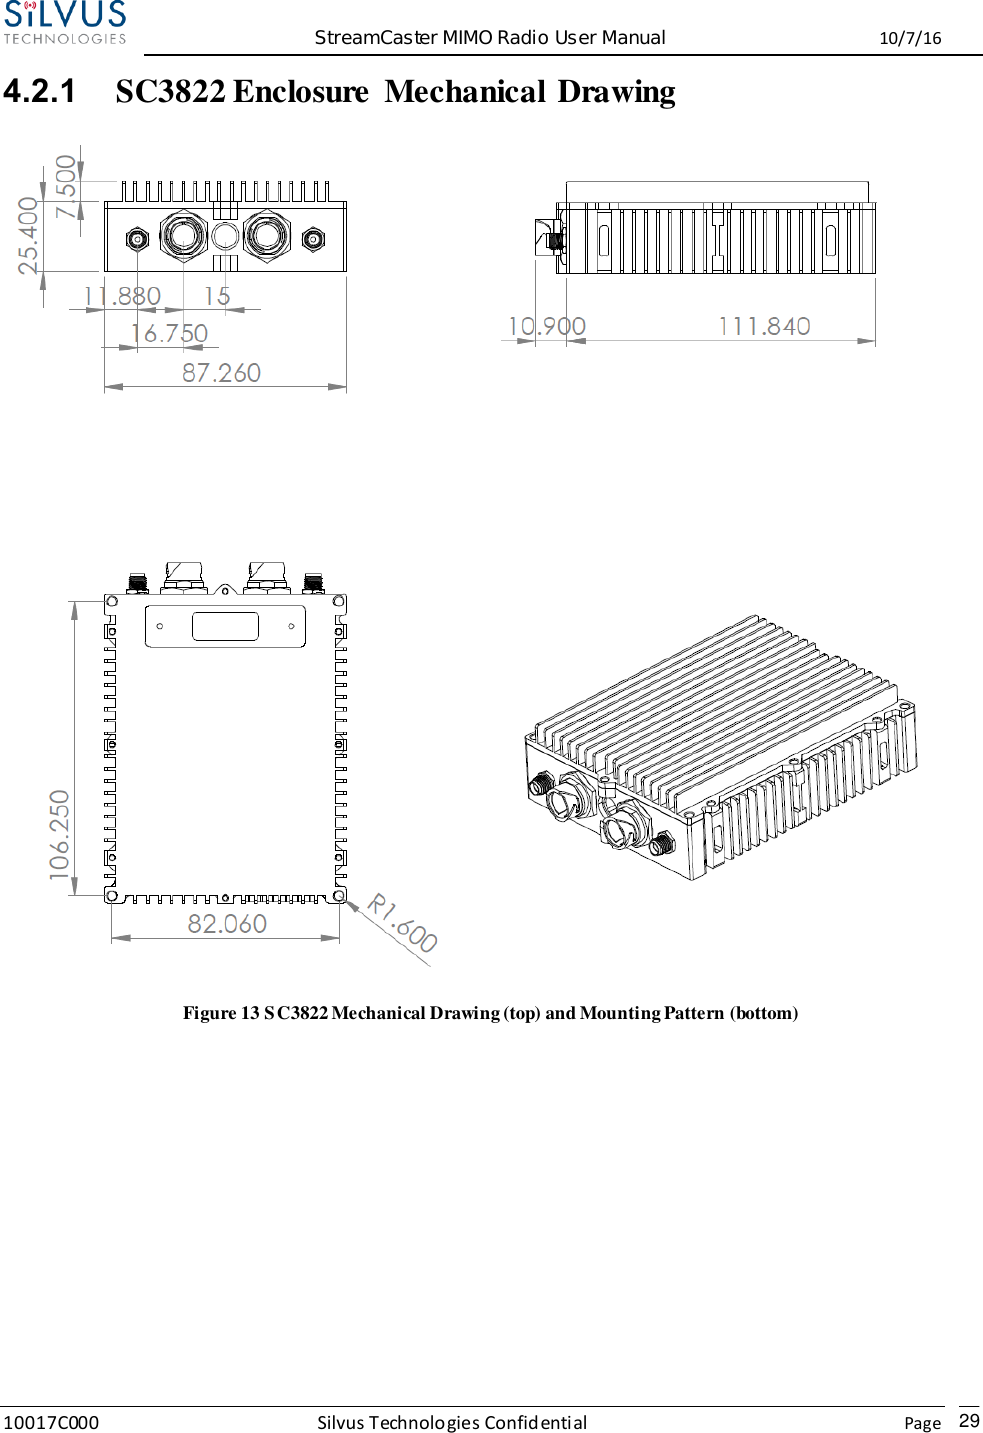  StreamCaster MIMO Radio User Manual  10/7/16 10017C000 Silvus Technologies Confidential    Page   29 4.2.1 SC3822 Enclosure  Mechanical Drawing    Figure 13 SC3822 Mechanical Drawing (top) and Mounting Pattern (bottom)  